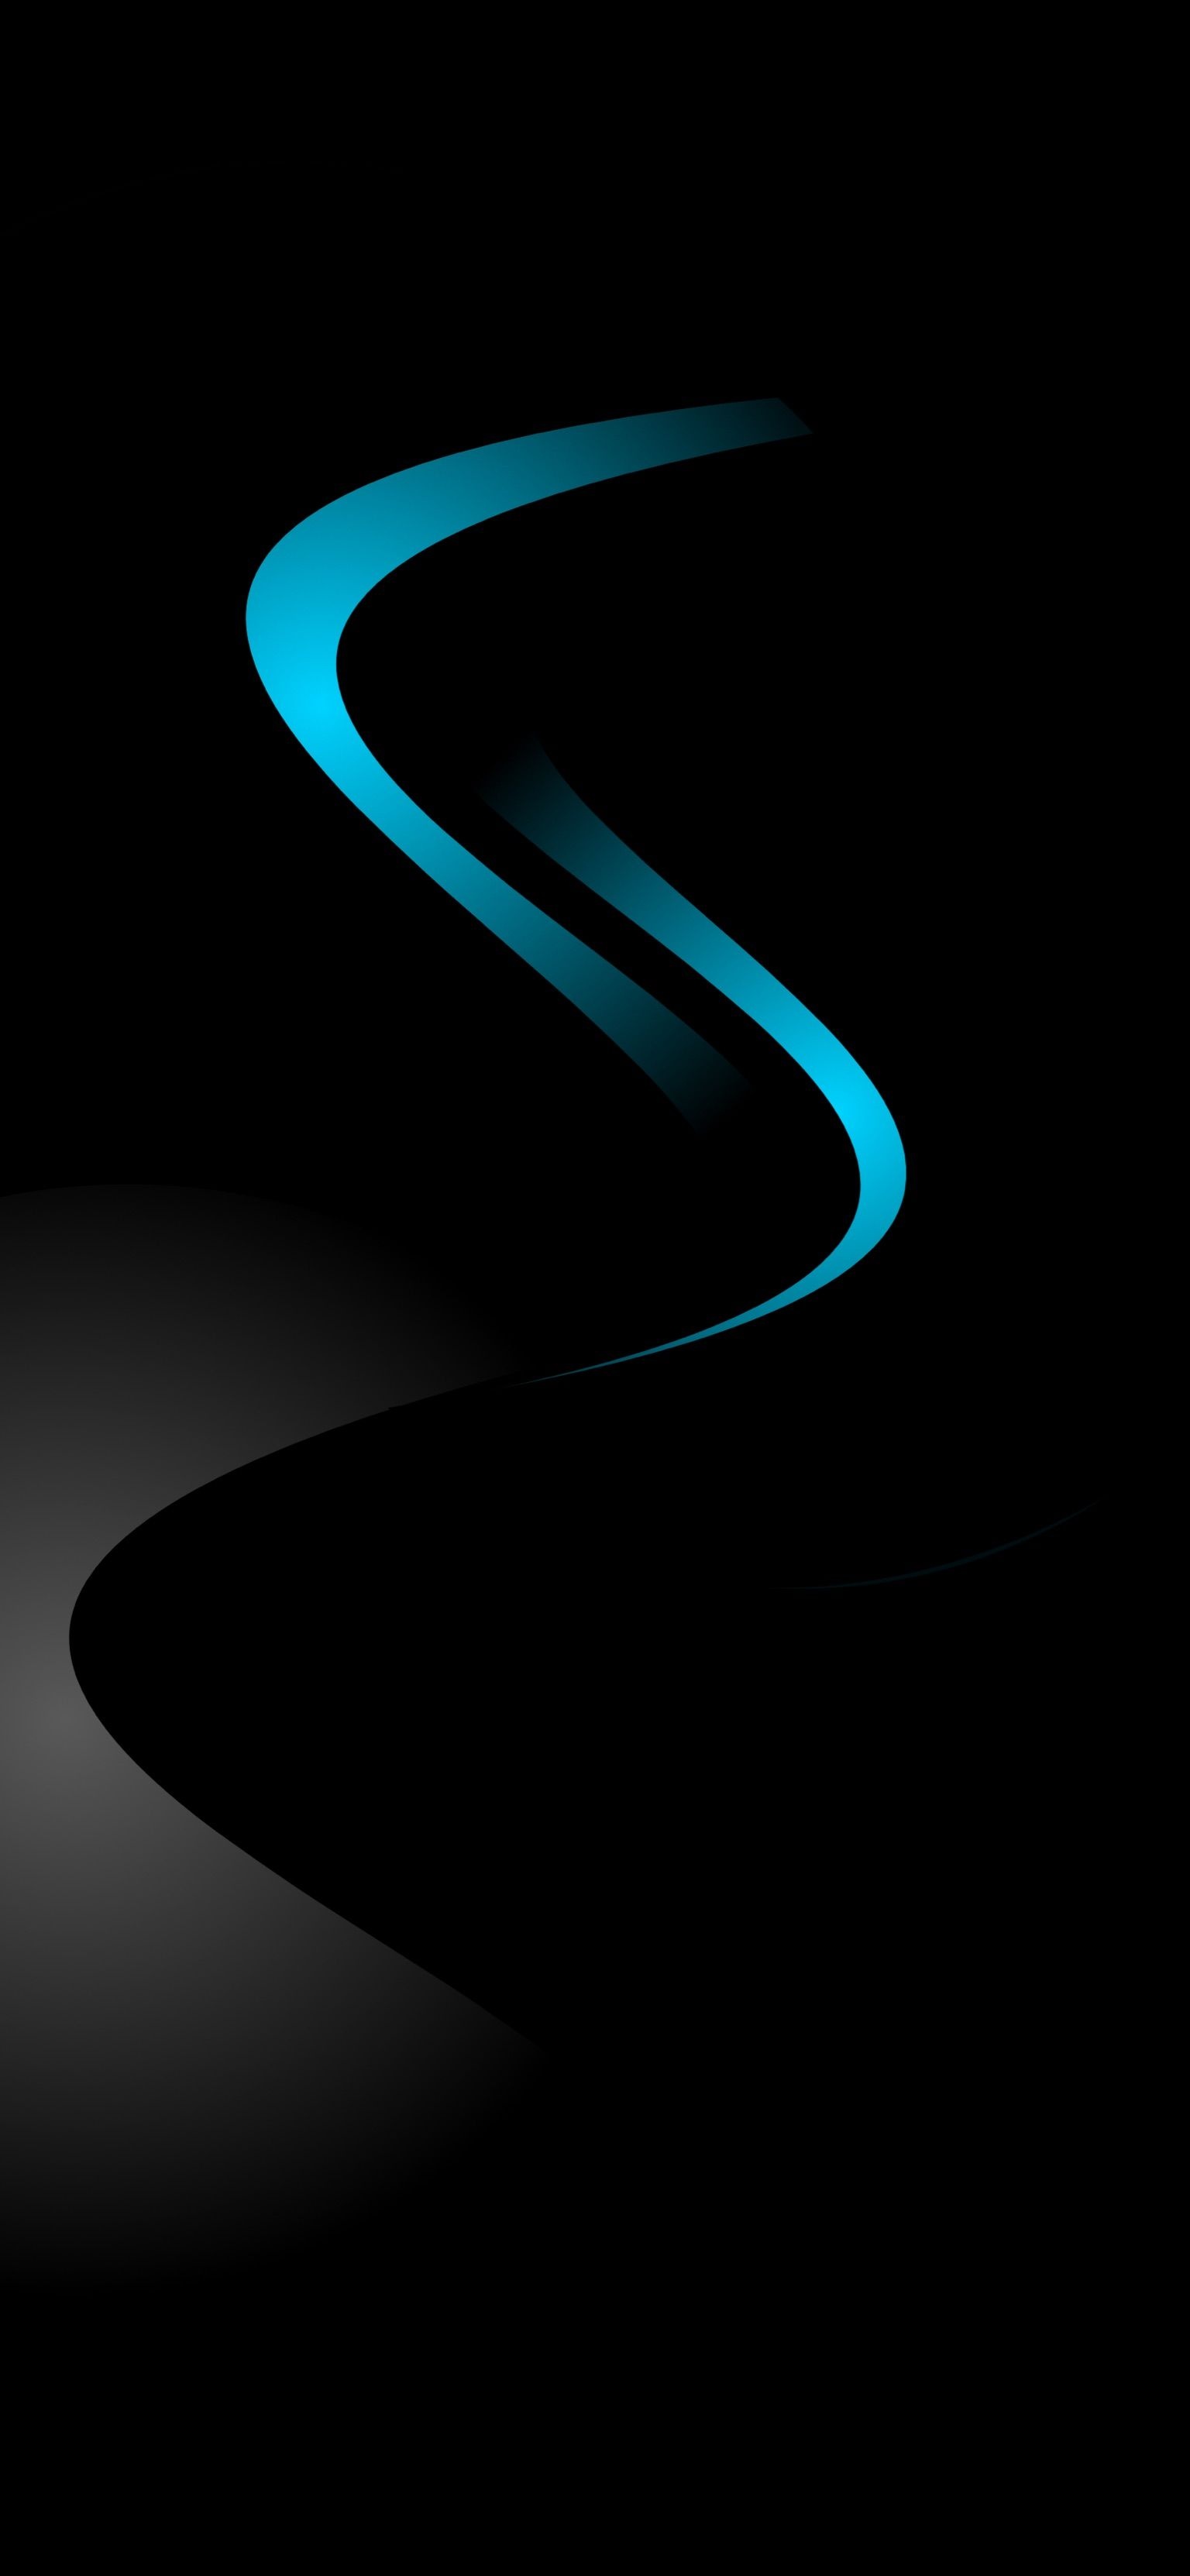 Graphic: Spiral, Parallel lines, Minimalism, Abstract, Digital art. 1540x3330 HD Wallpaper.